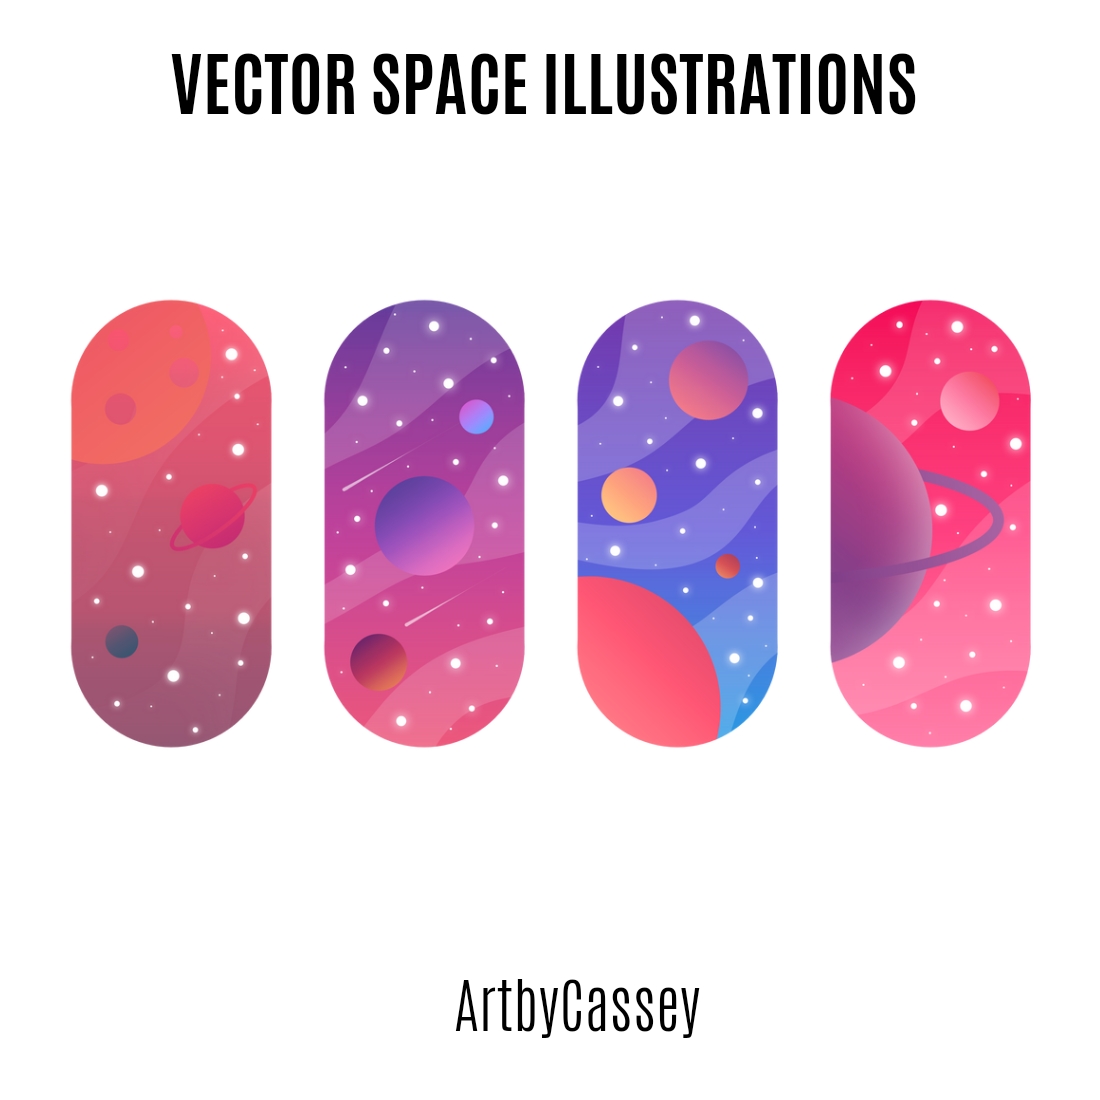 Vector Space Illustrations cover image.